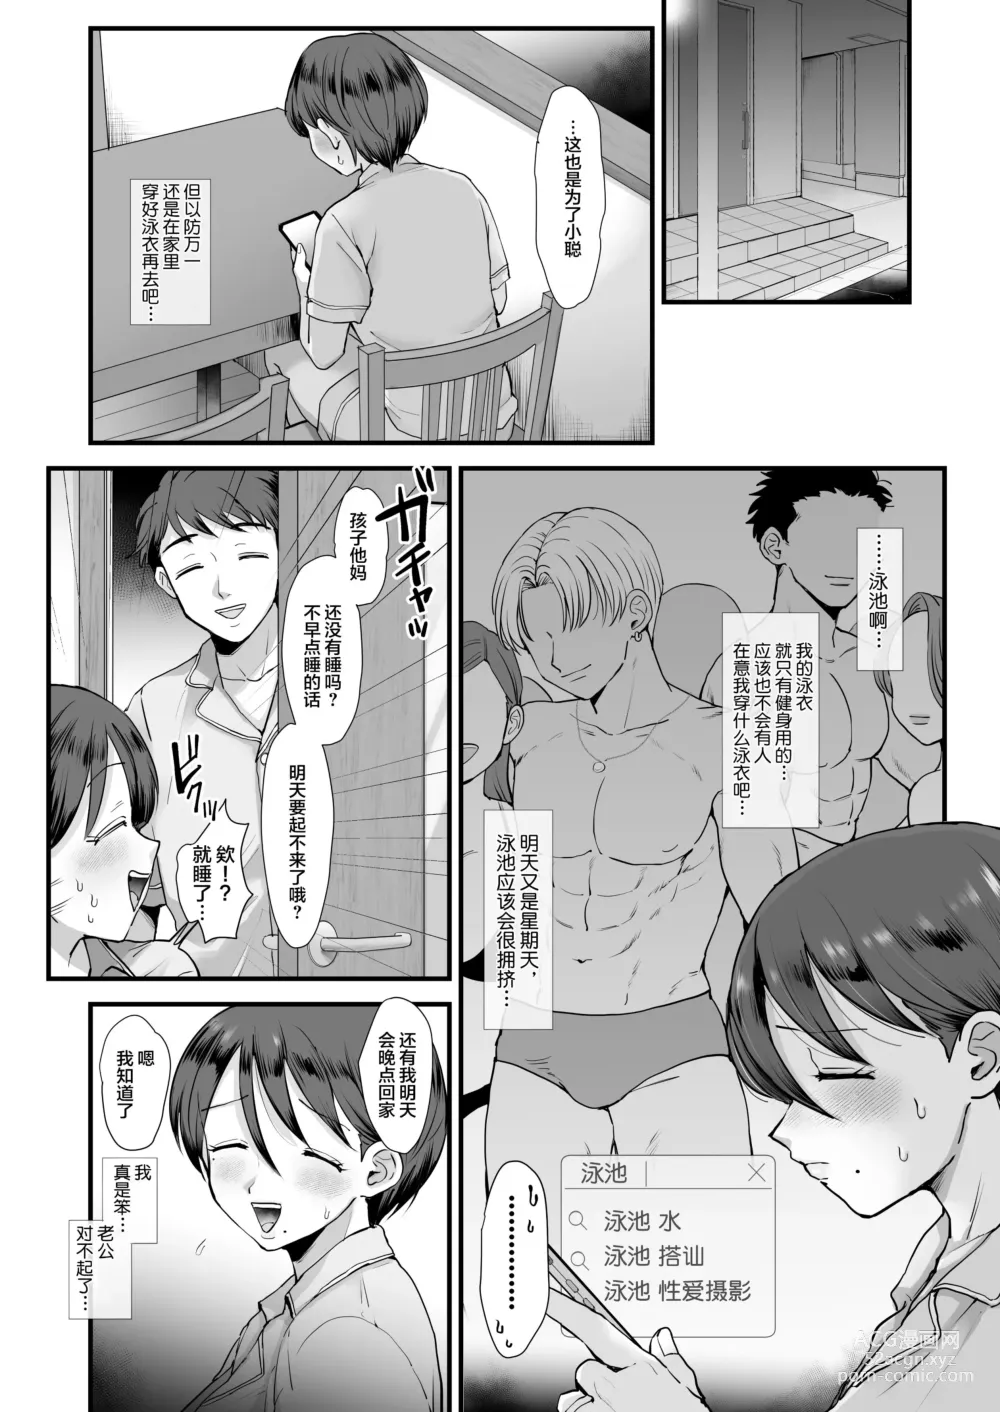 Page 8 of doujinshi sinistra (Eda)] Continued: A laid-back big-breasted mom. [Chinese translation